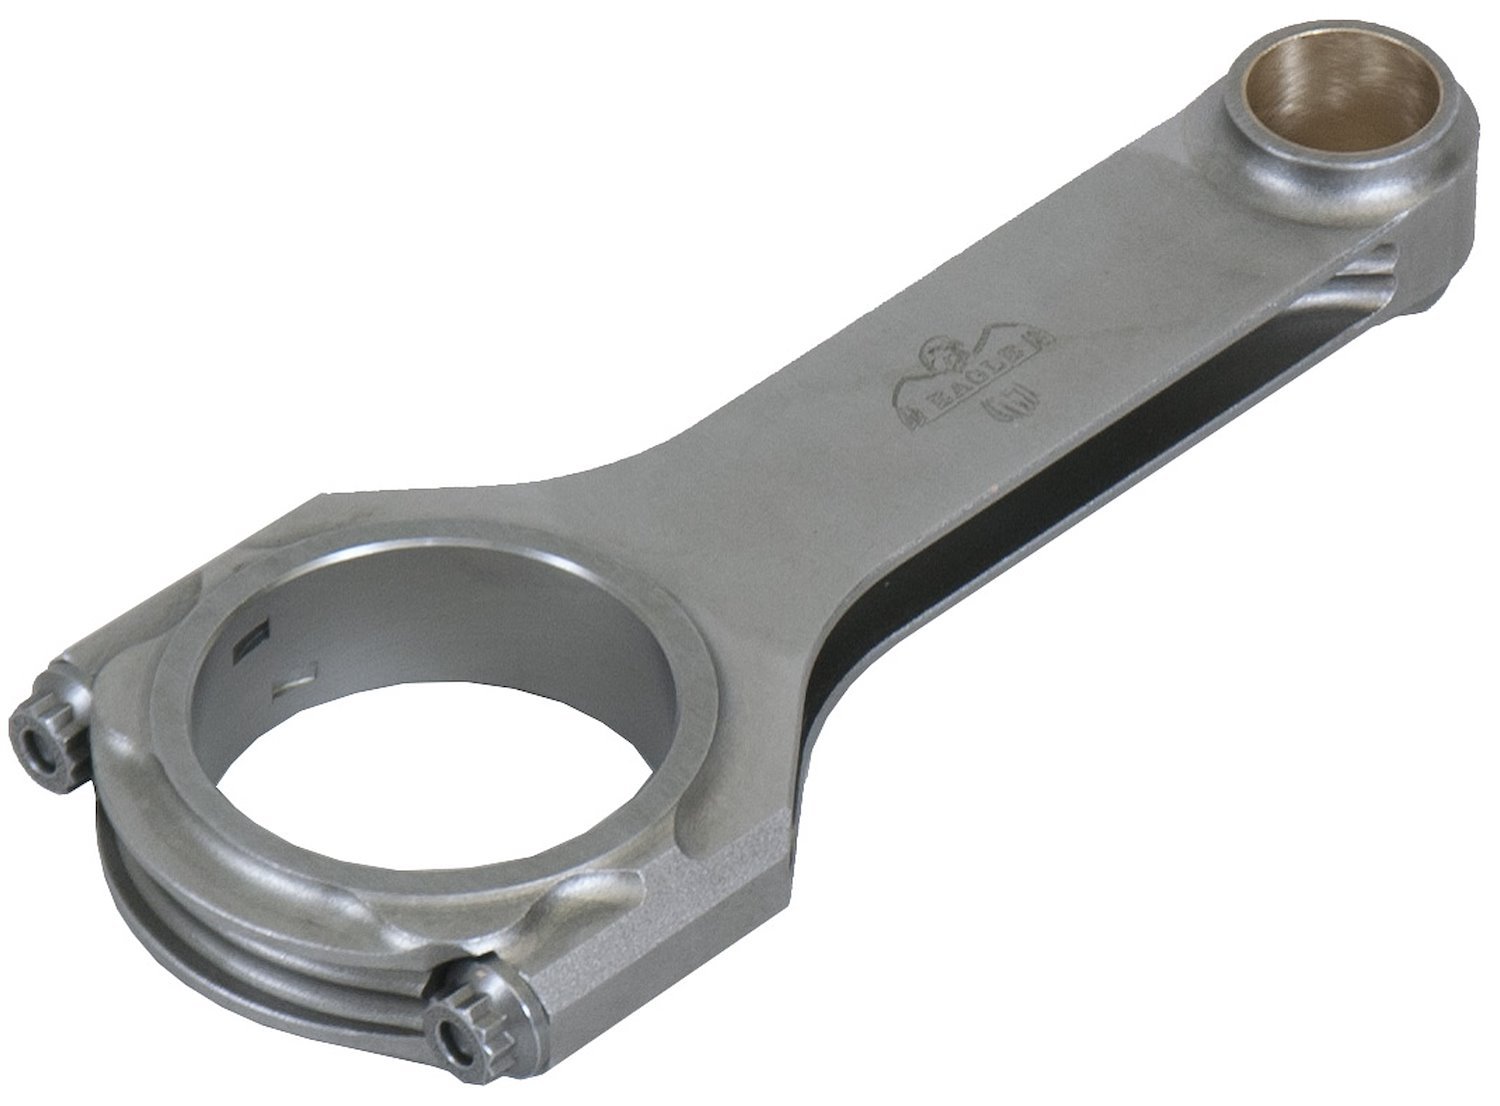 CRS68004D-1 H-Beam 4th Generation Design (4D) 6.800 in. Forged Steel Connecting Rod for Chevy Big Block Engines